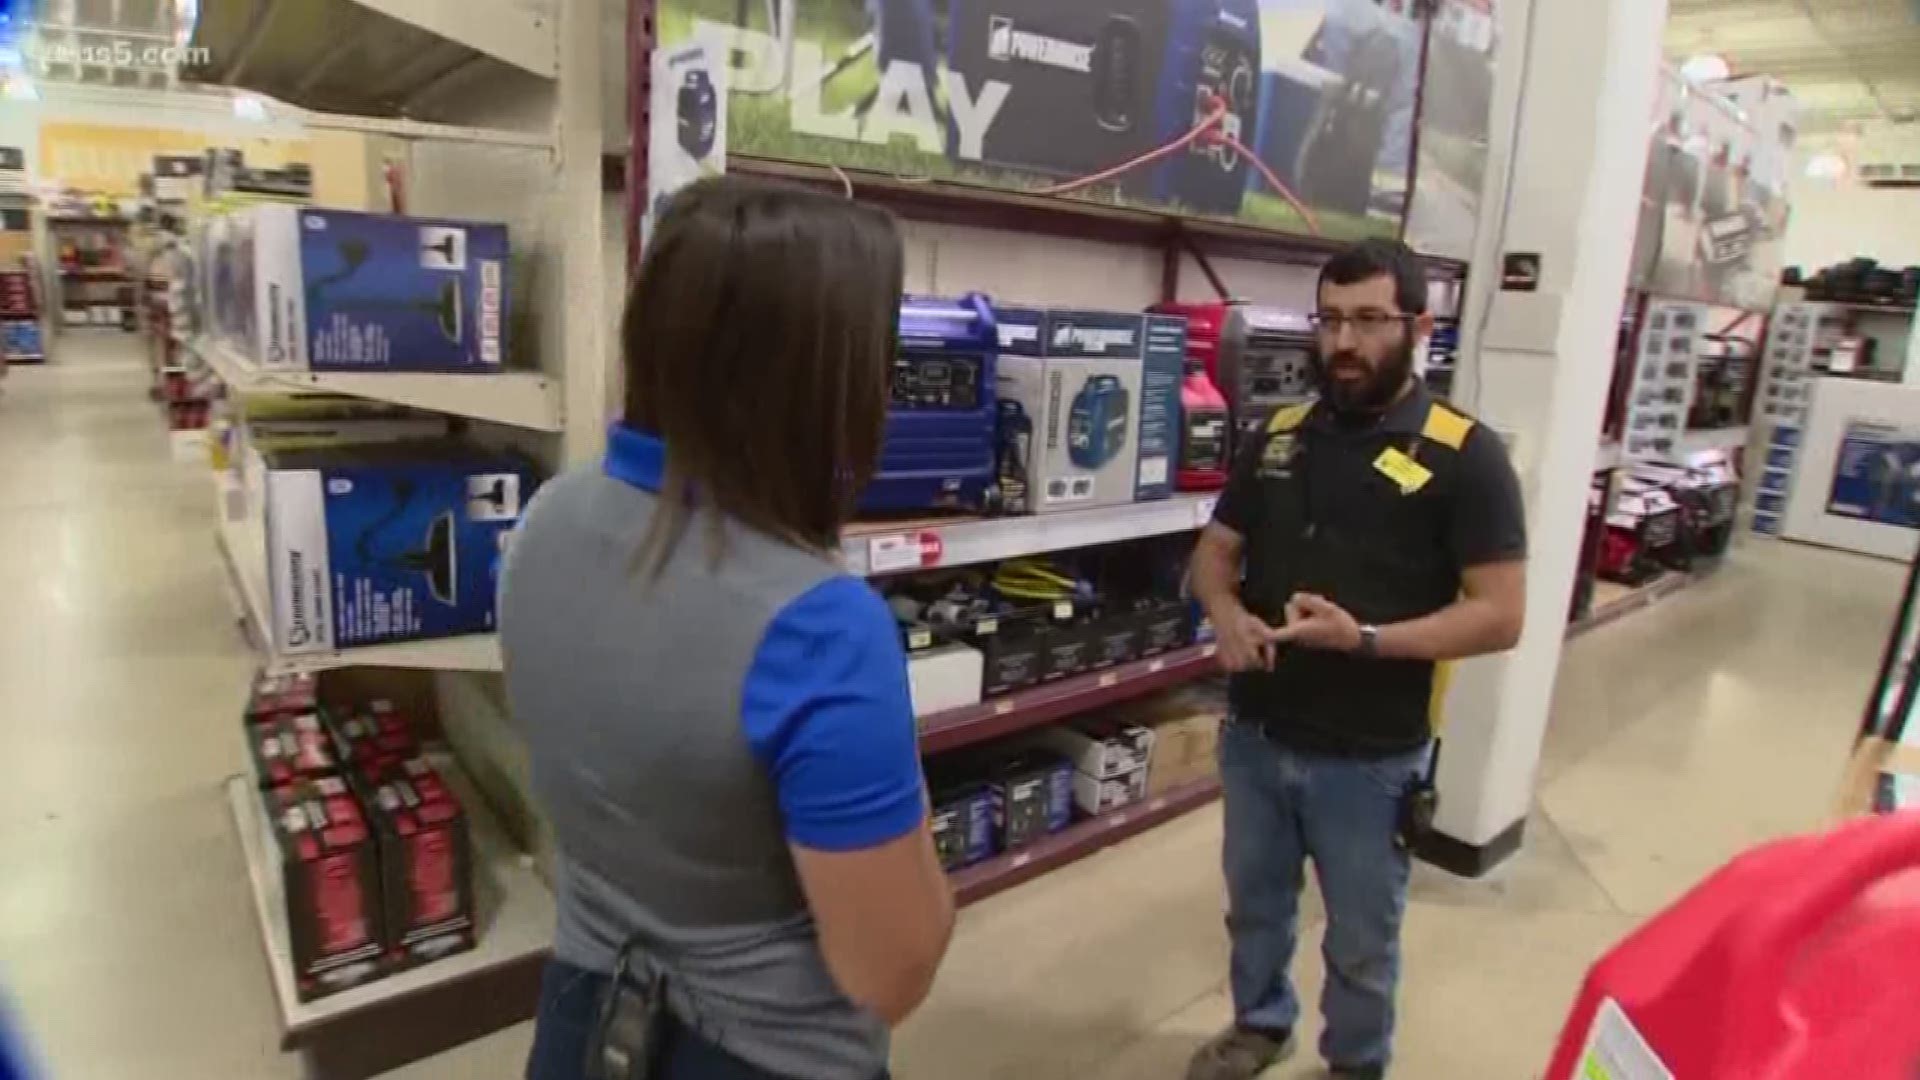 This weekend is the perfect time to load up on emergency supplies. KENS 5's Jaleesa Irizarry has more.